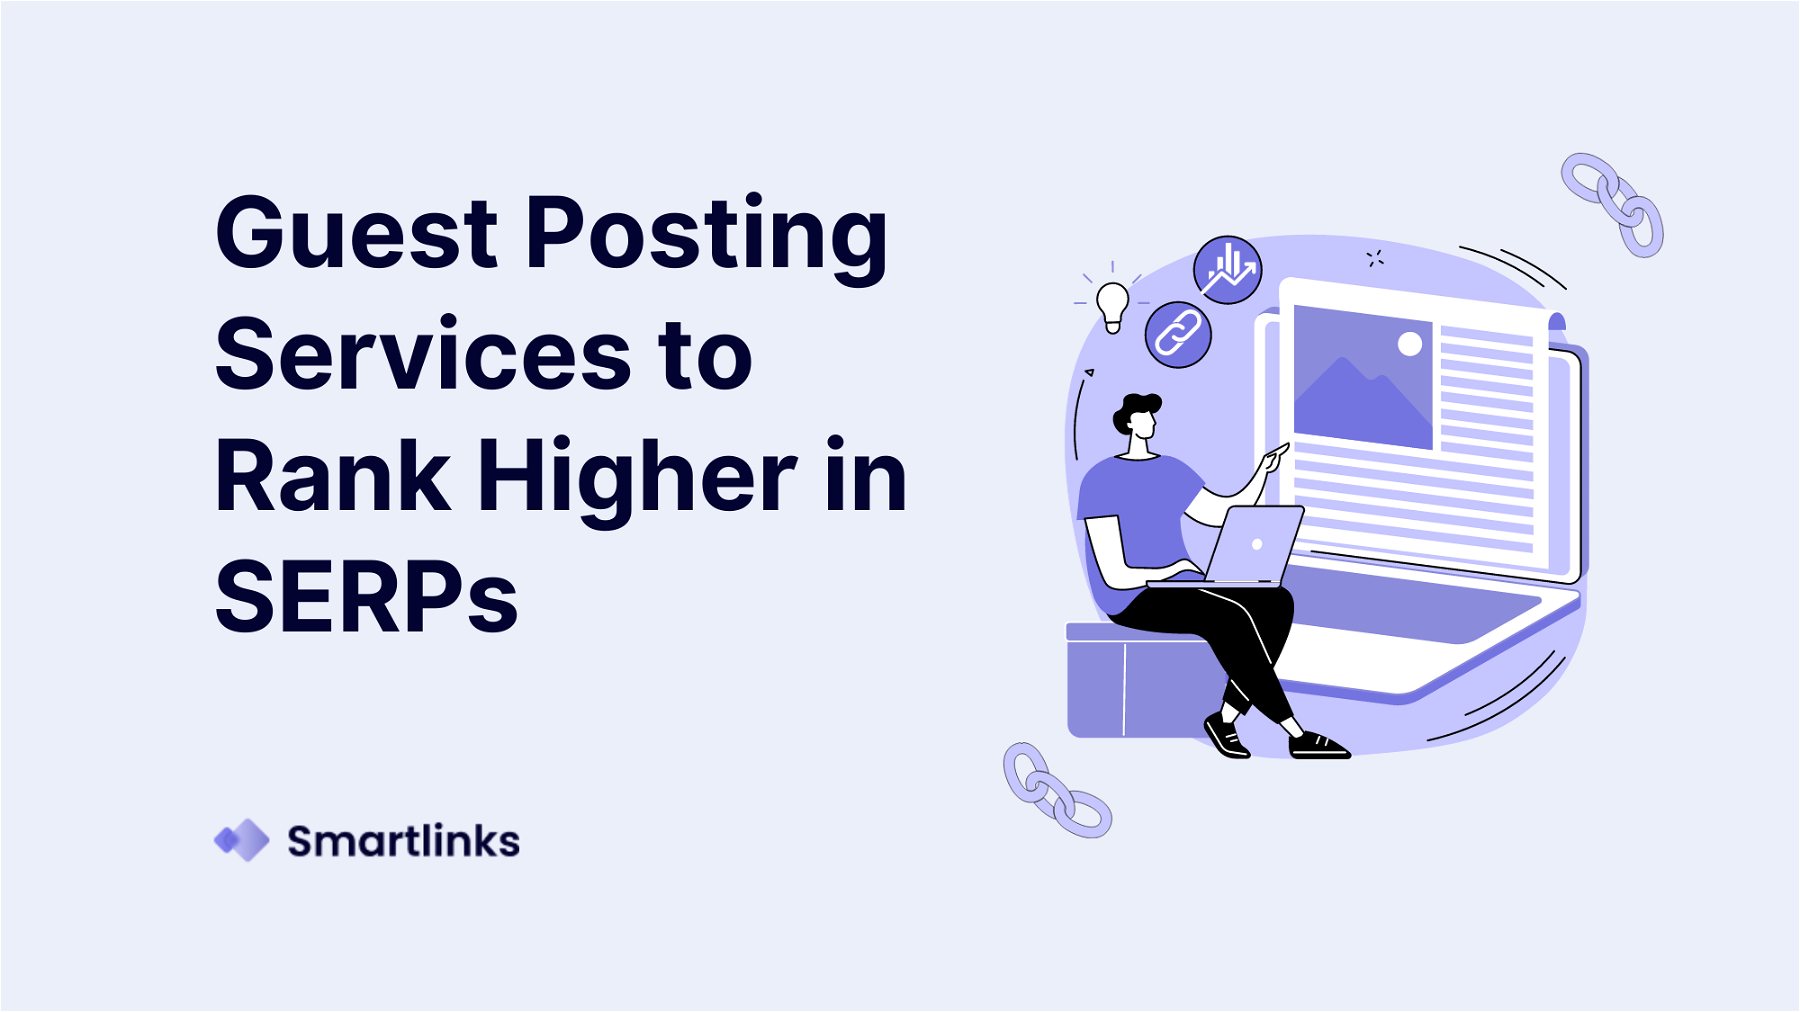 10 Guest Posting Services to Rank Higher in SERPs